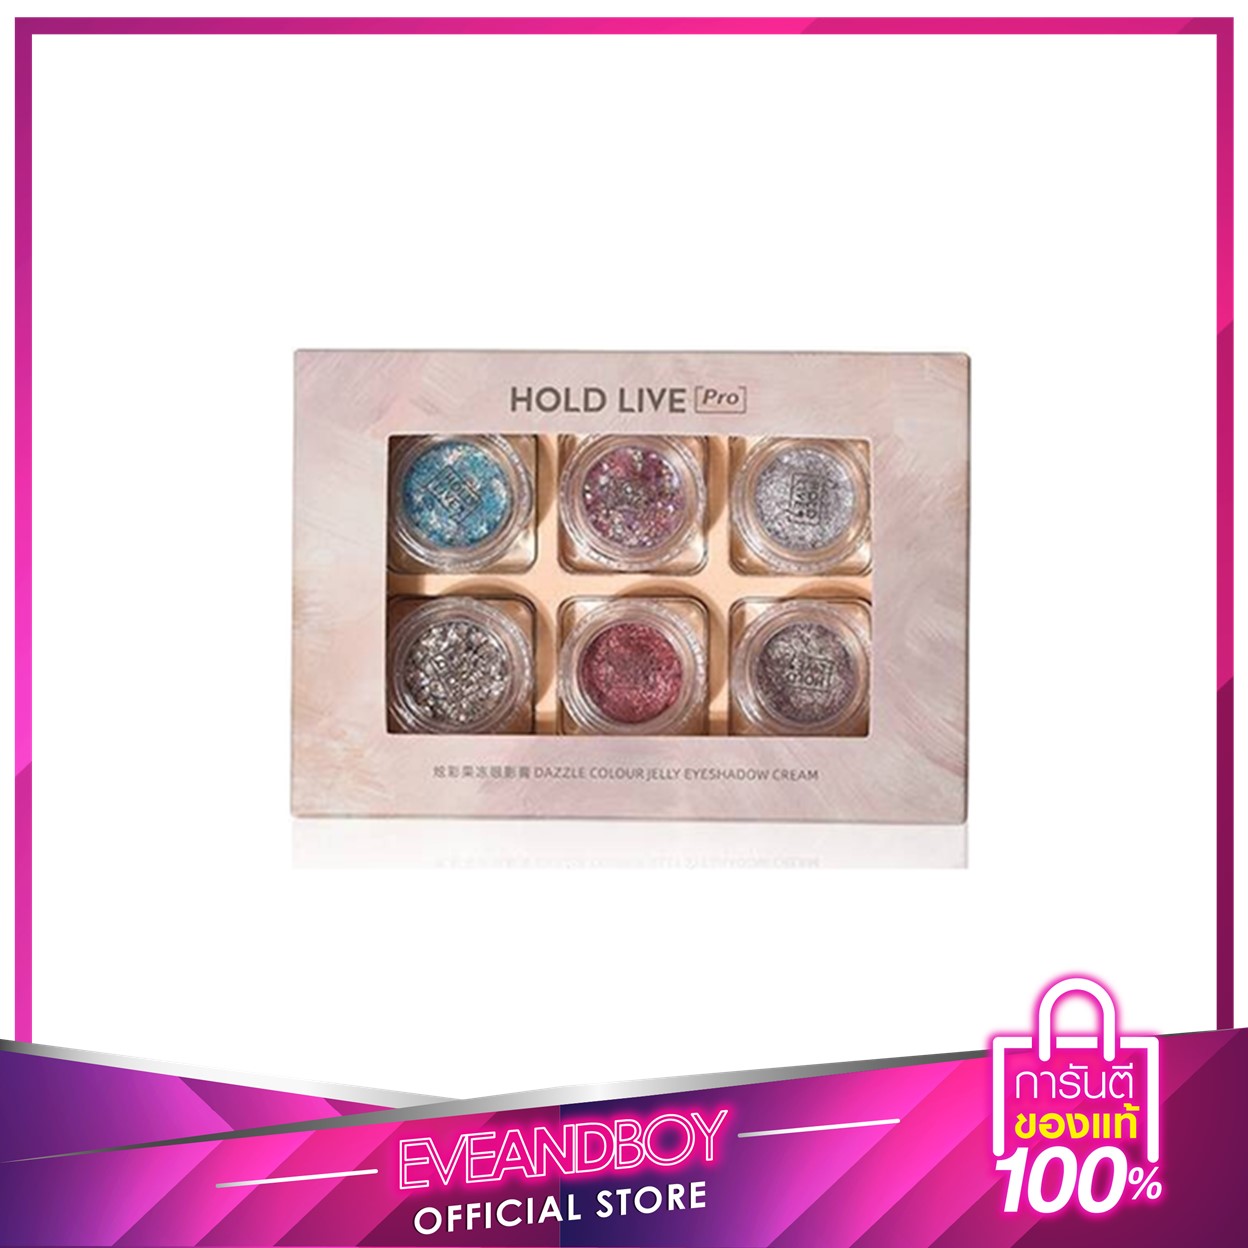 HOLD LIVE Dazzle Colour Jelly Eyeshadow Cream 4 g.